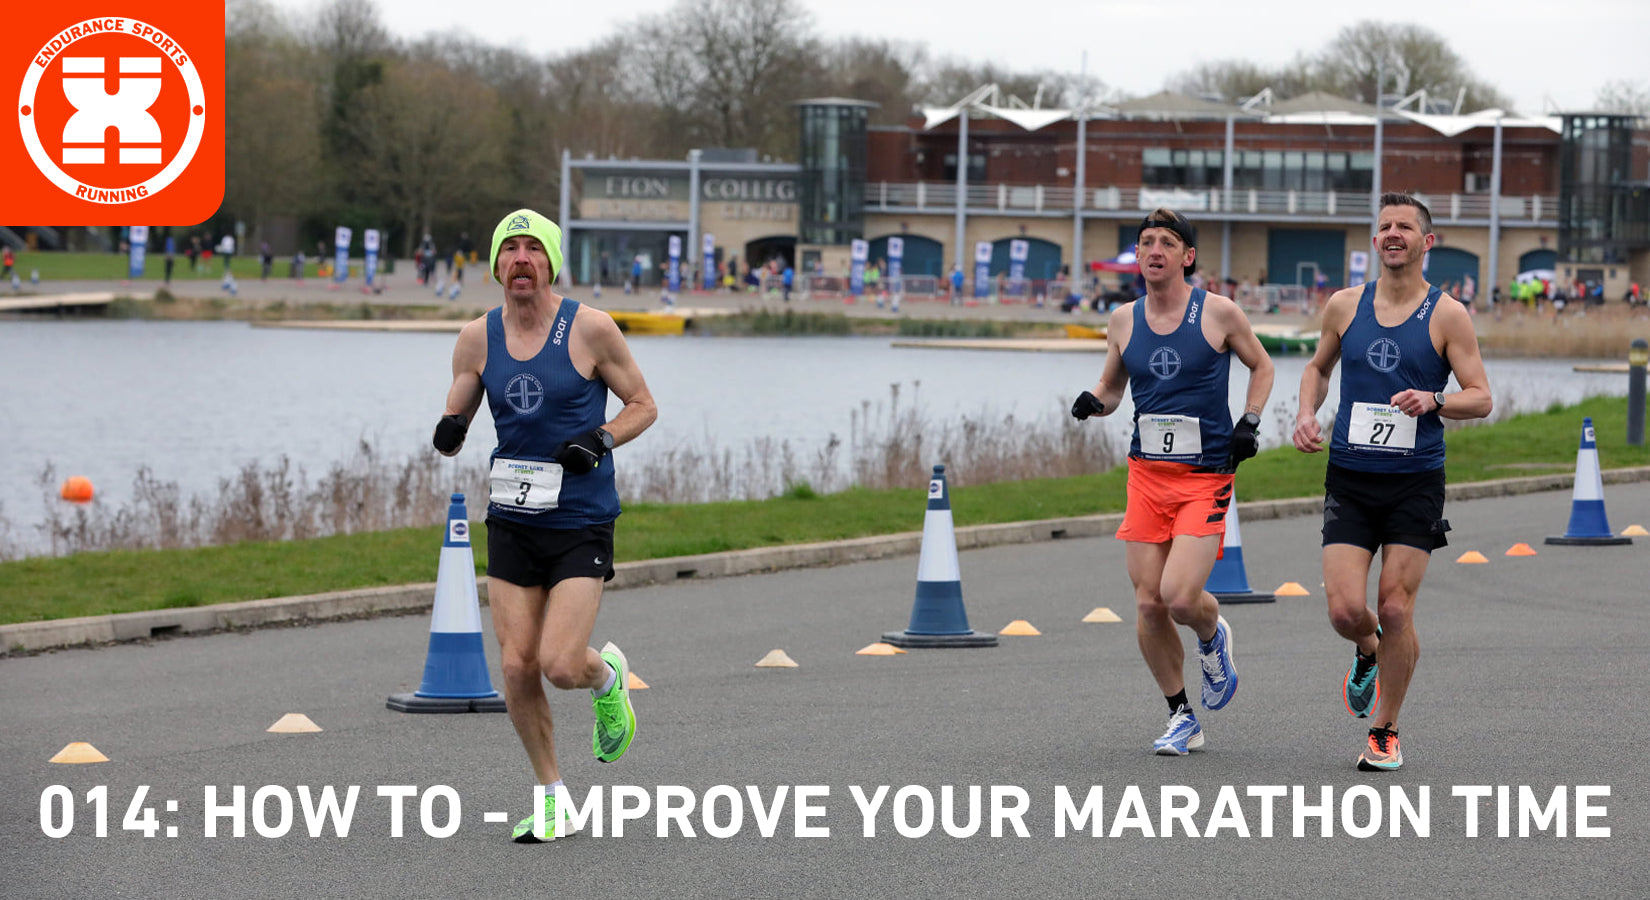 014: Endurance Sports Running - How to improve your marathon time?